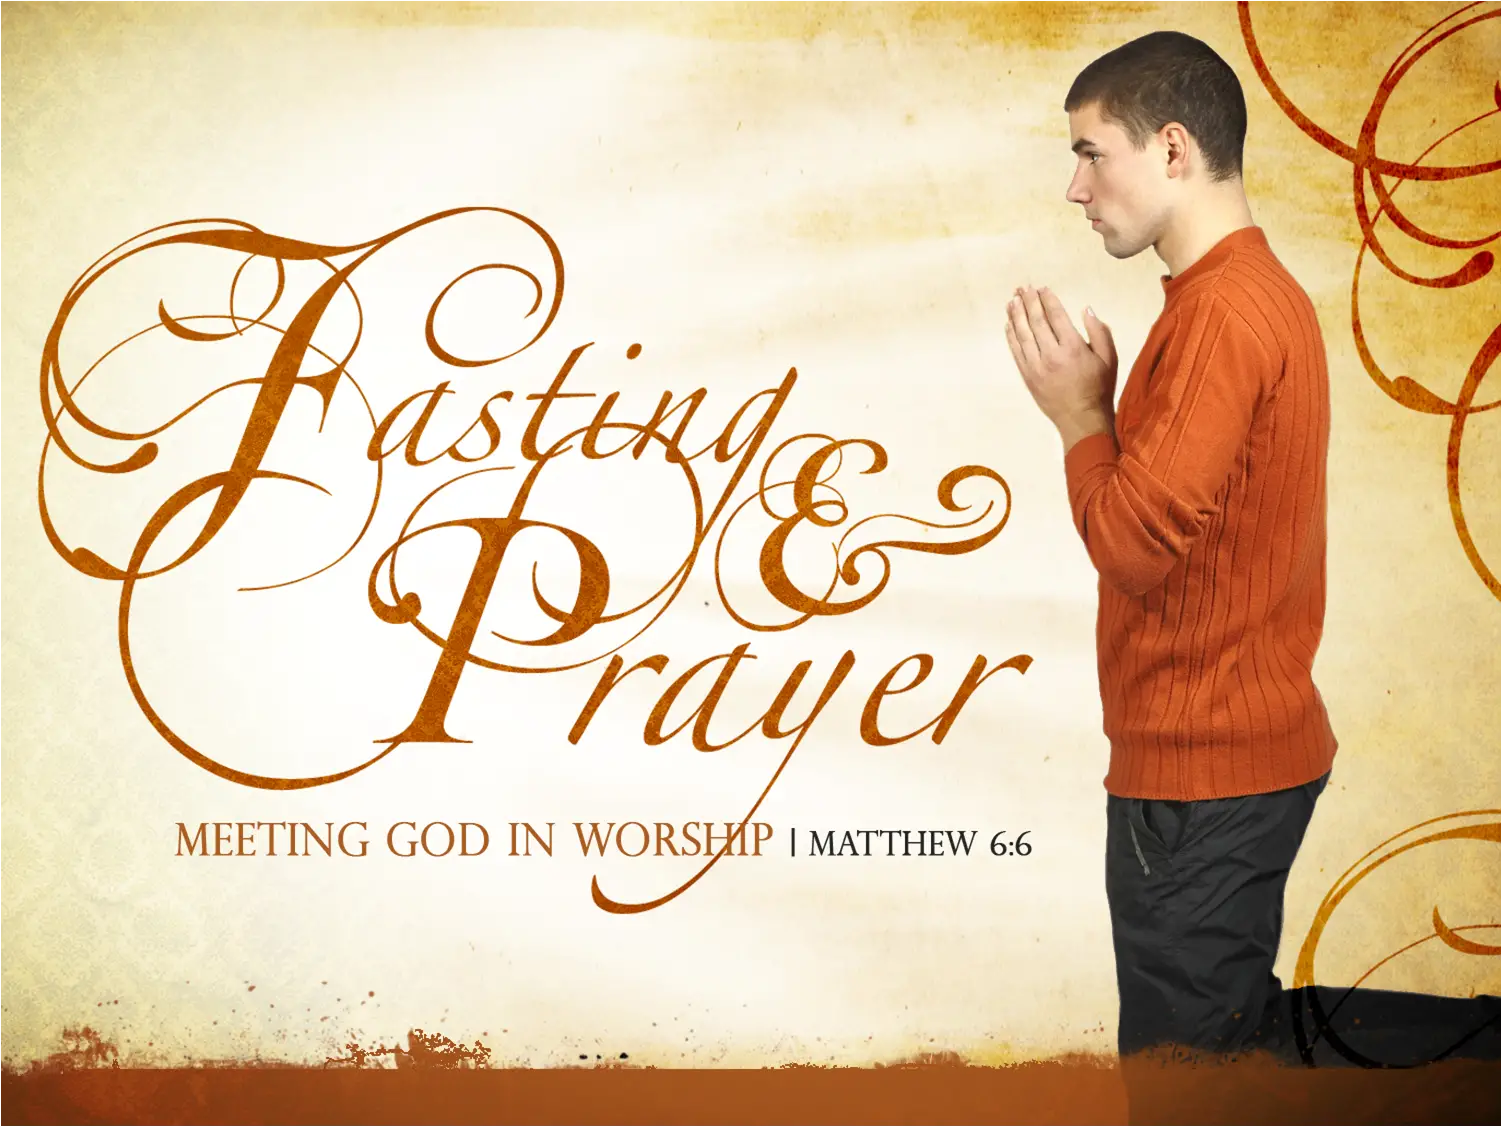 The Power of Fasting and Prayer